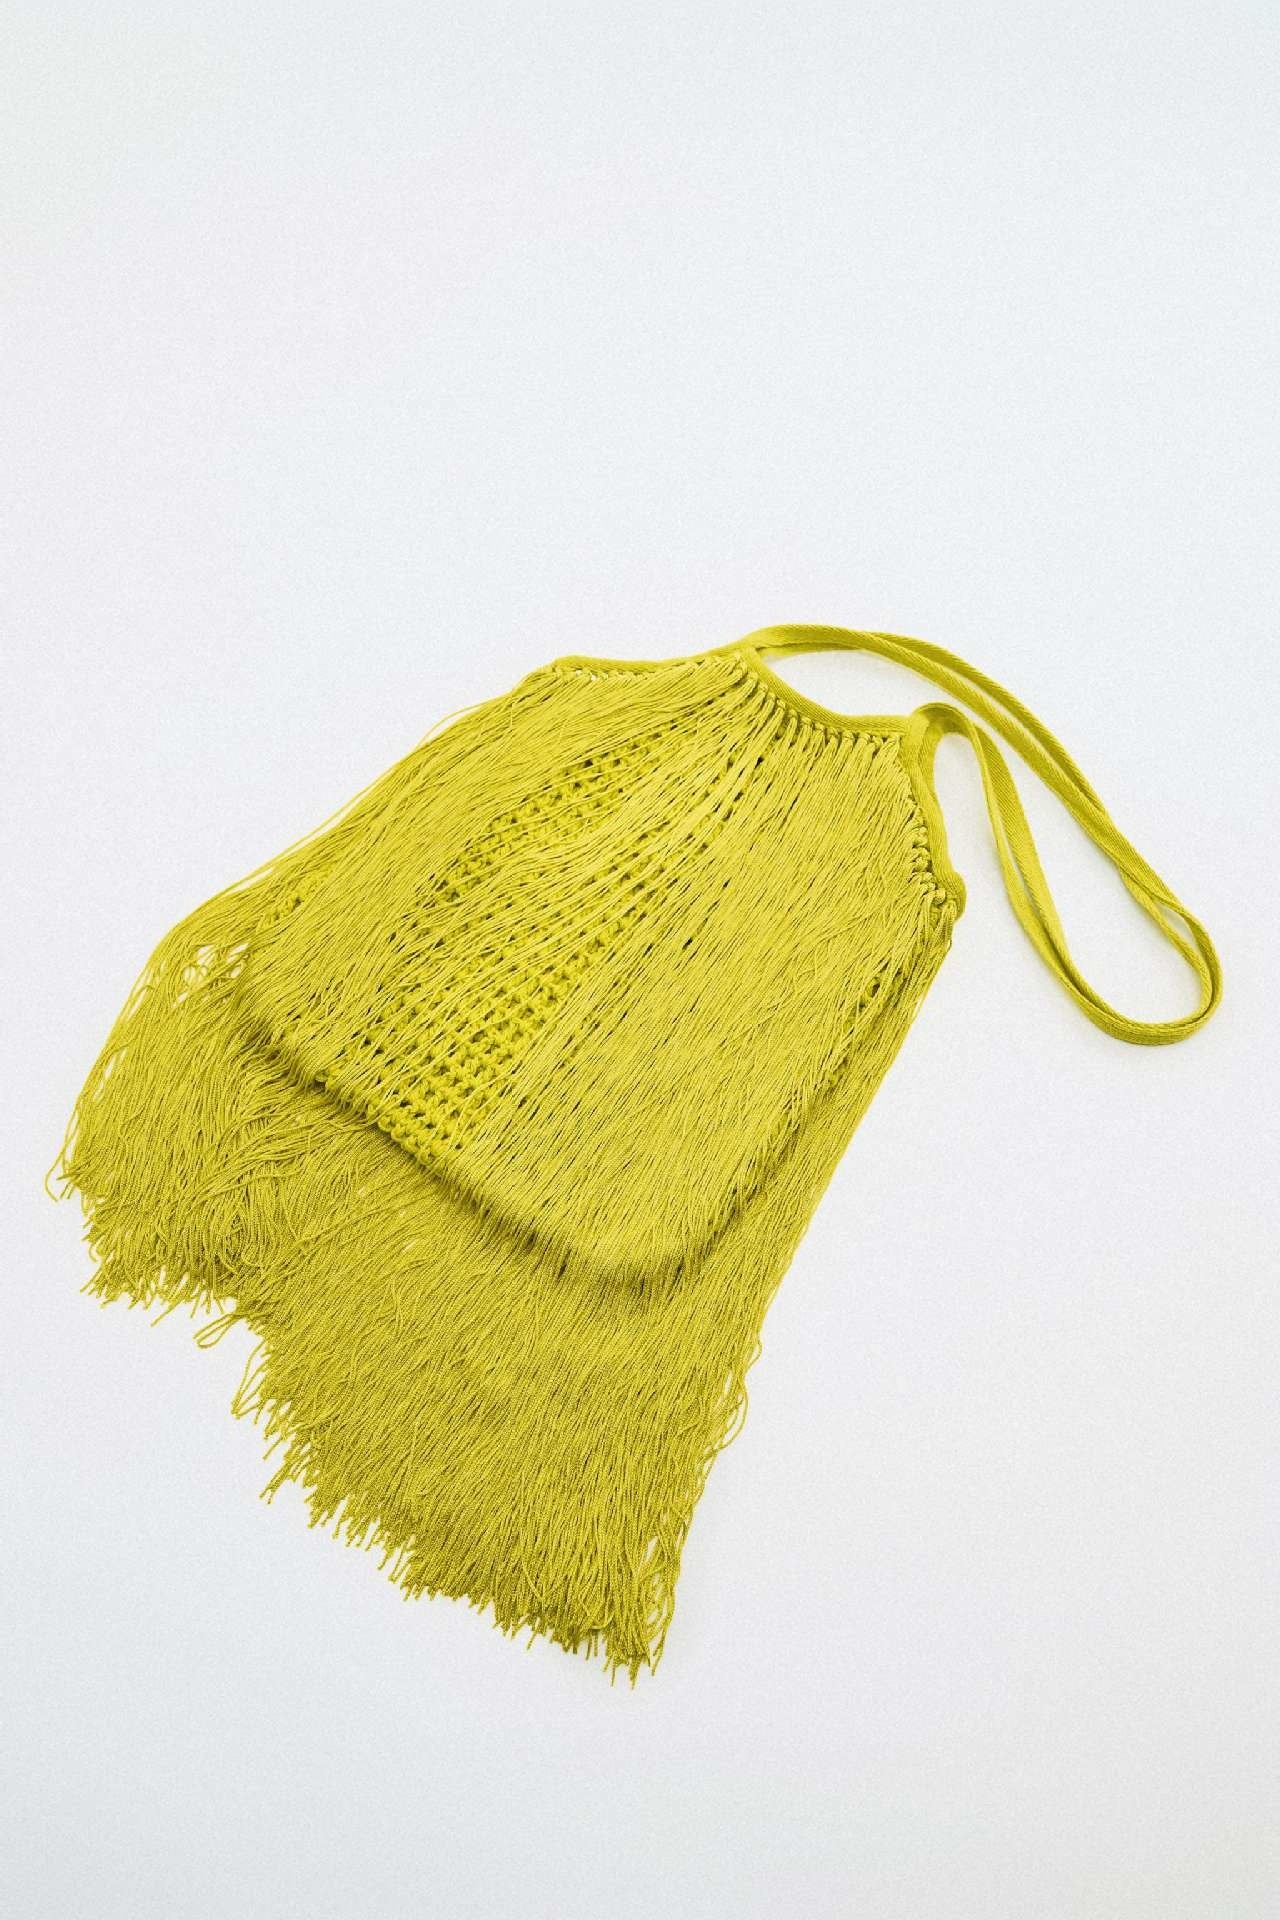 Hand-Woven Cotton Hemp Knit Shopping Hobo Shoulder Bags Natural Dyed